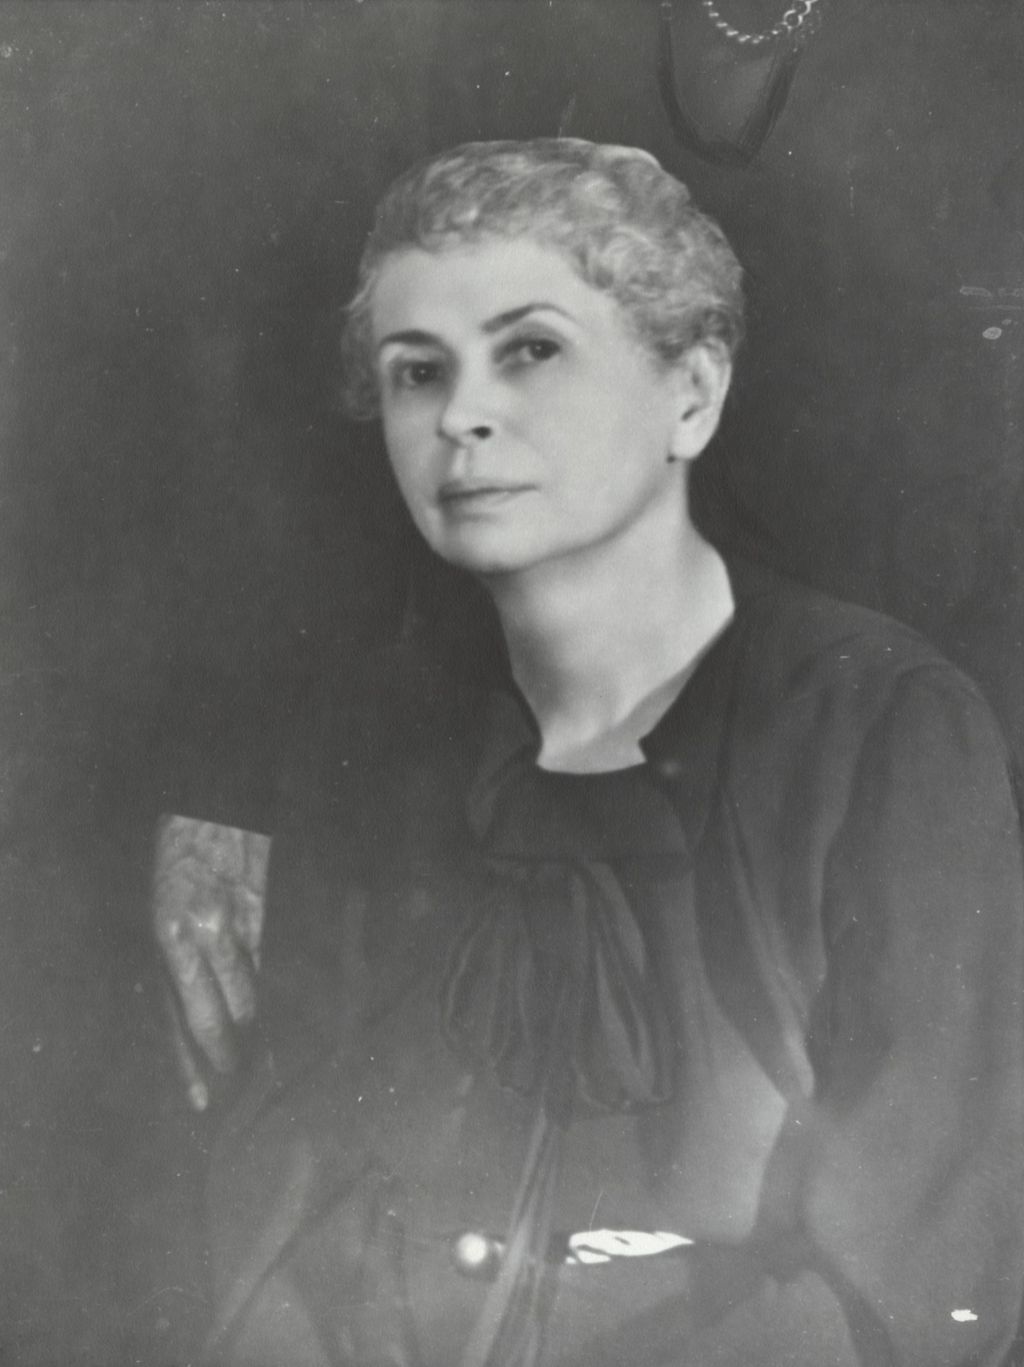 Hull-House resident and art, theater, and dance instructor Edith de Nancrede